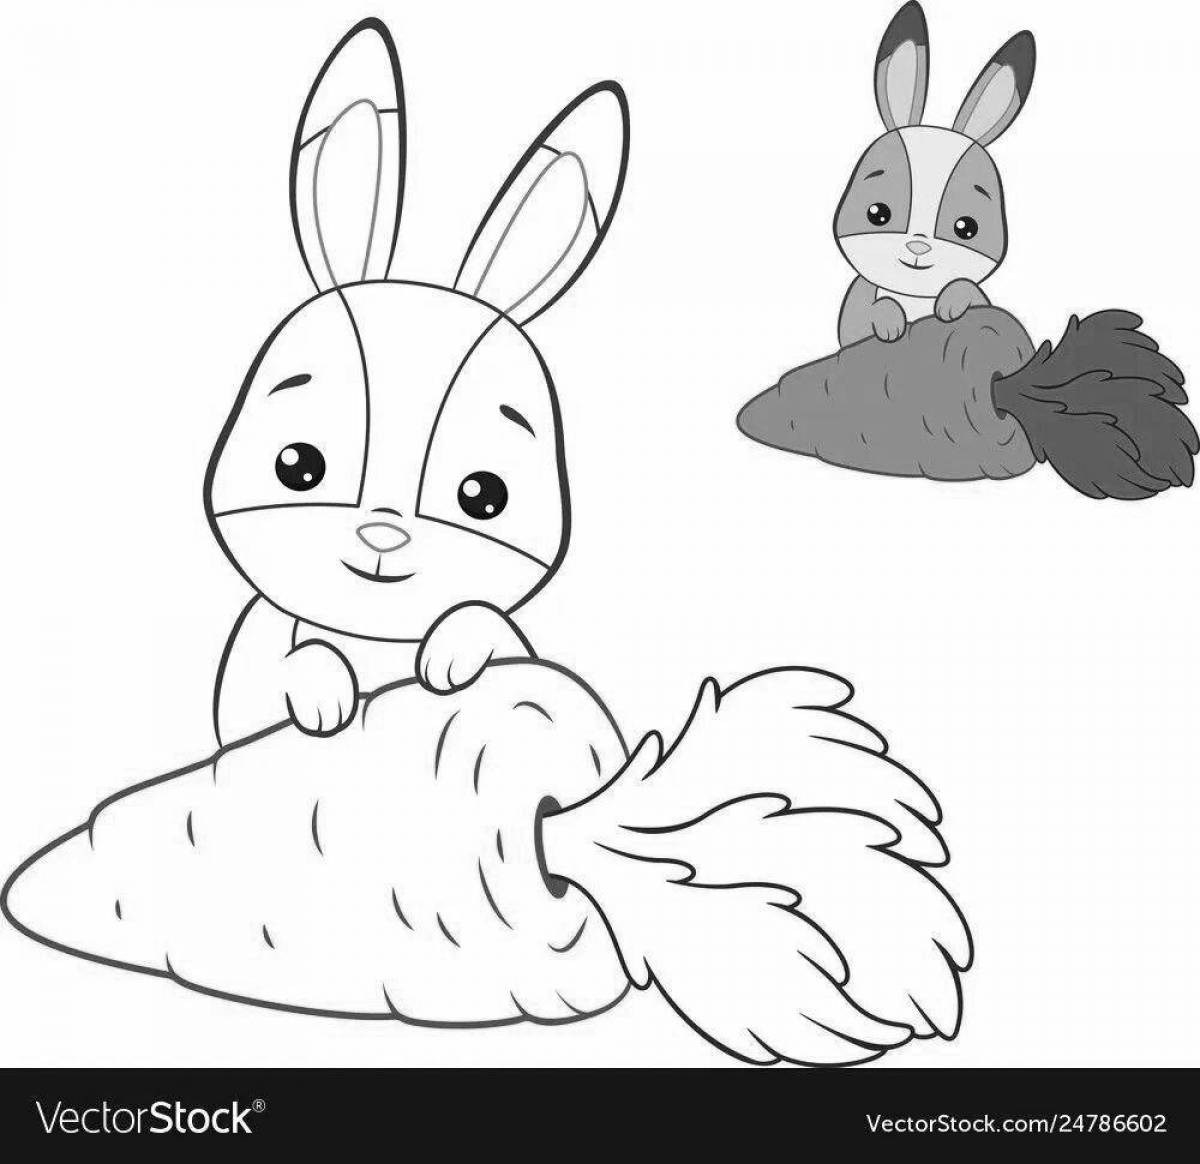 Adorable rabbit and carrot coloring book for kids